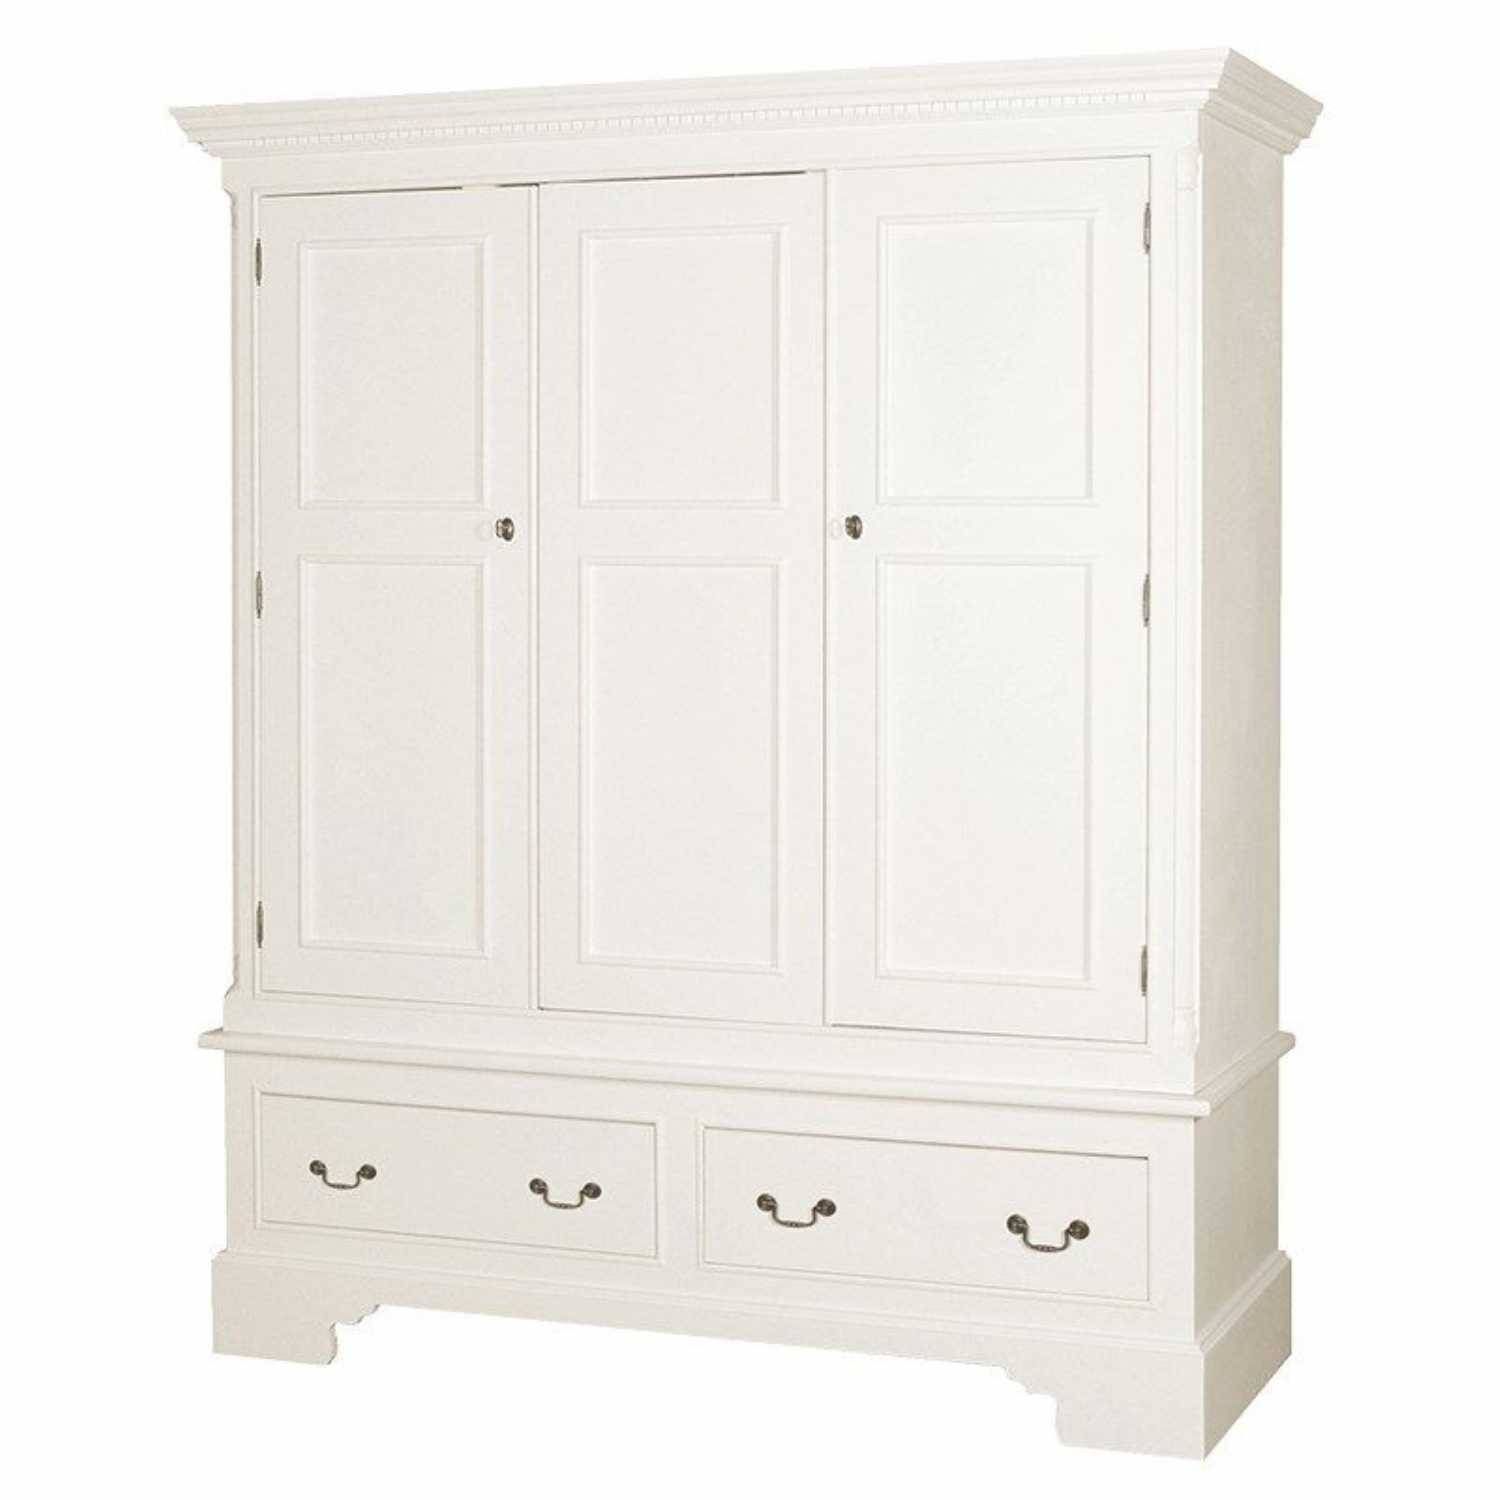 Georgian Shabby Chic White Painted Small Double Wardrobe With Drawer Regarding Shabby Chic White Wardrobes (View 6 of 15)